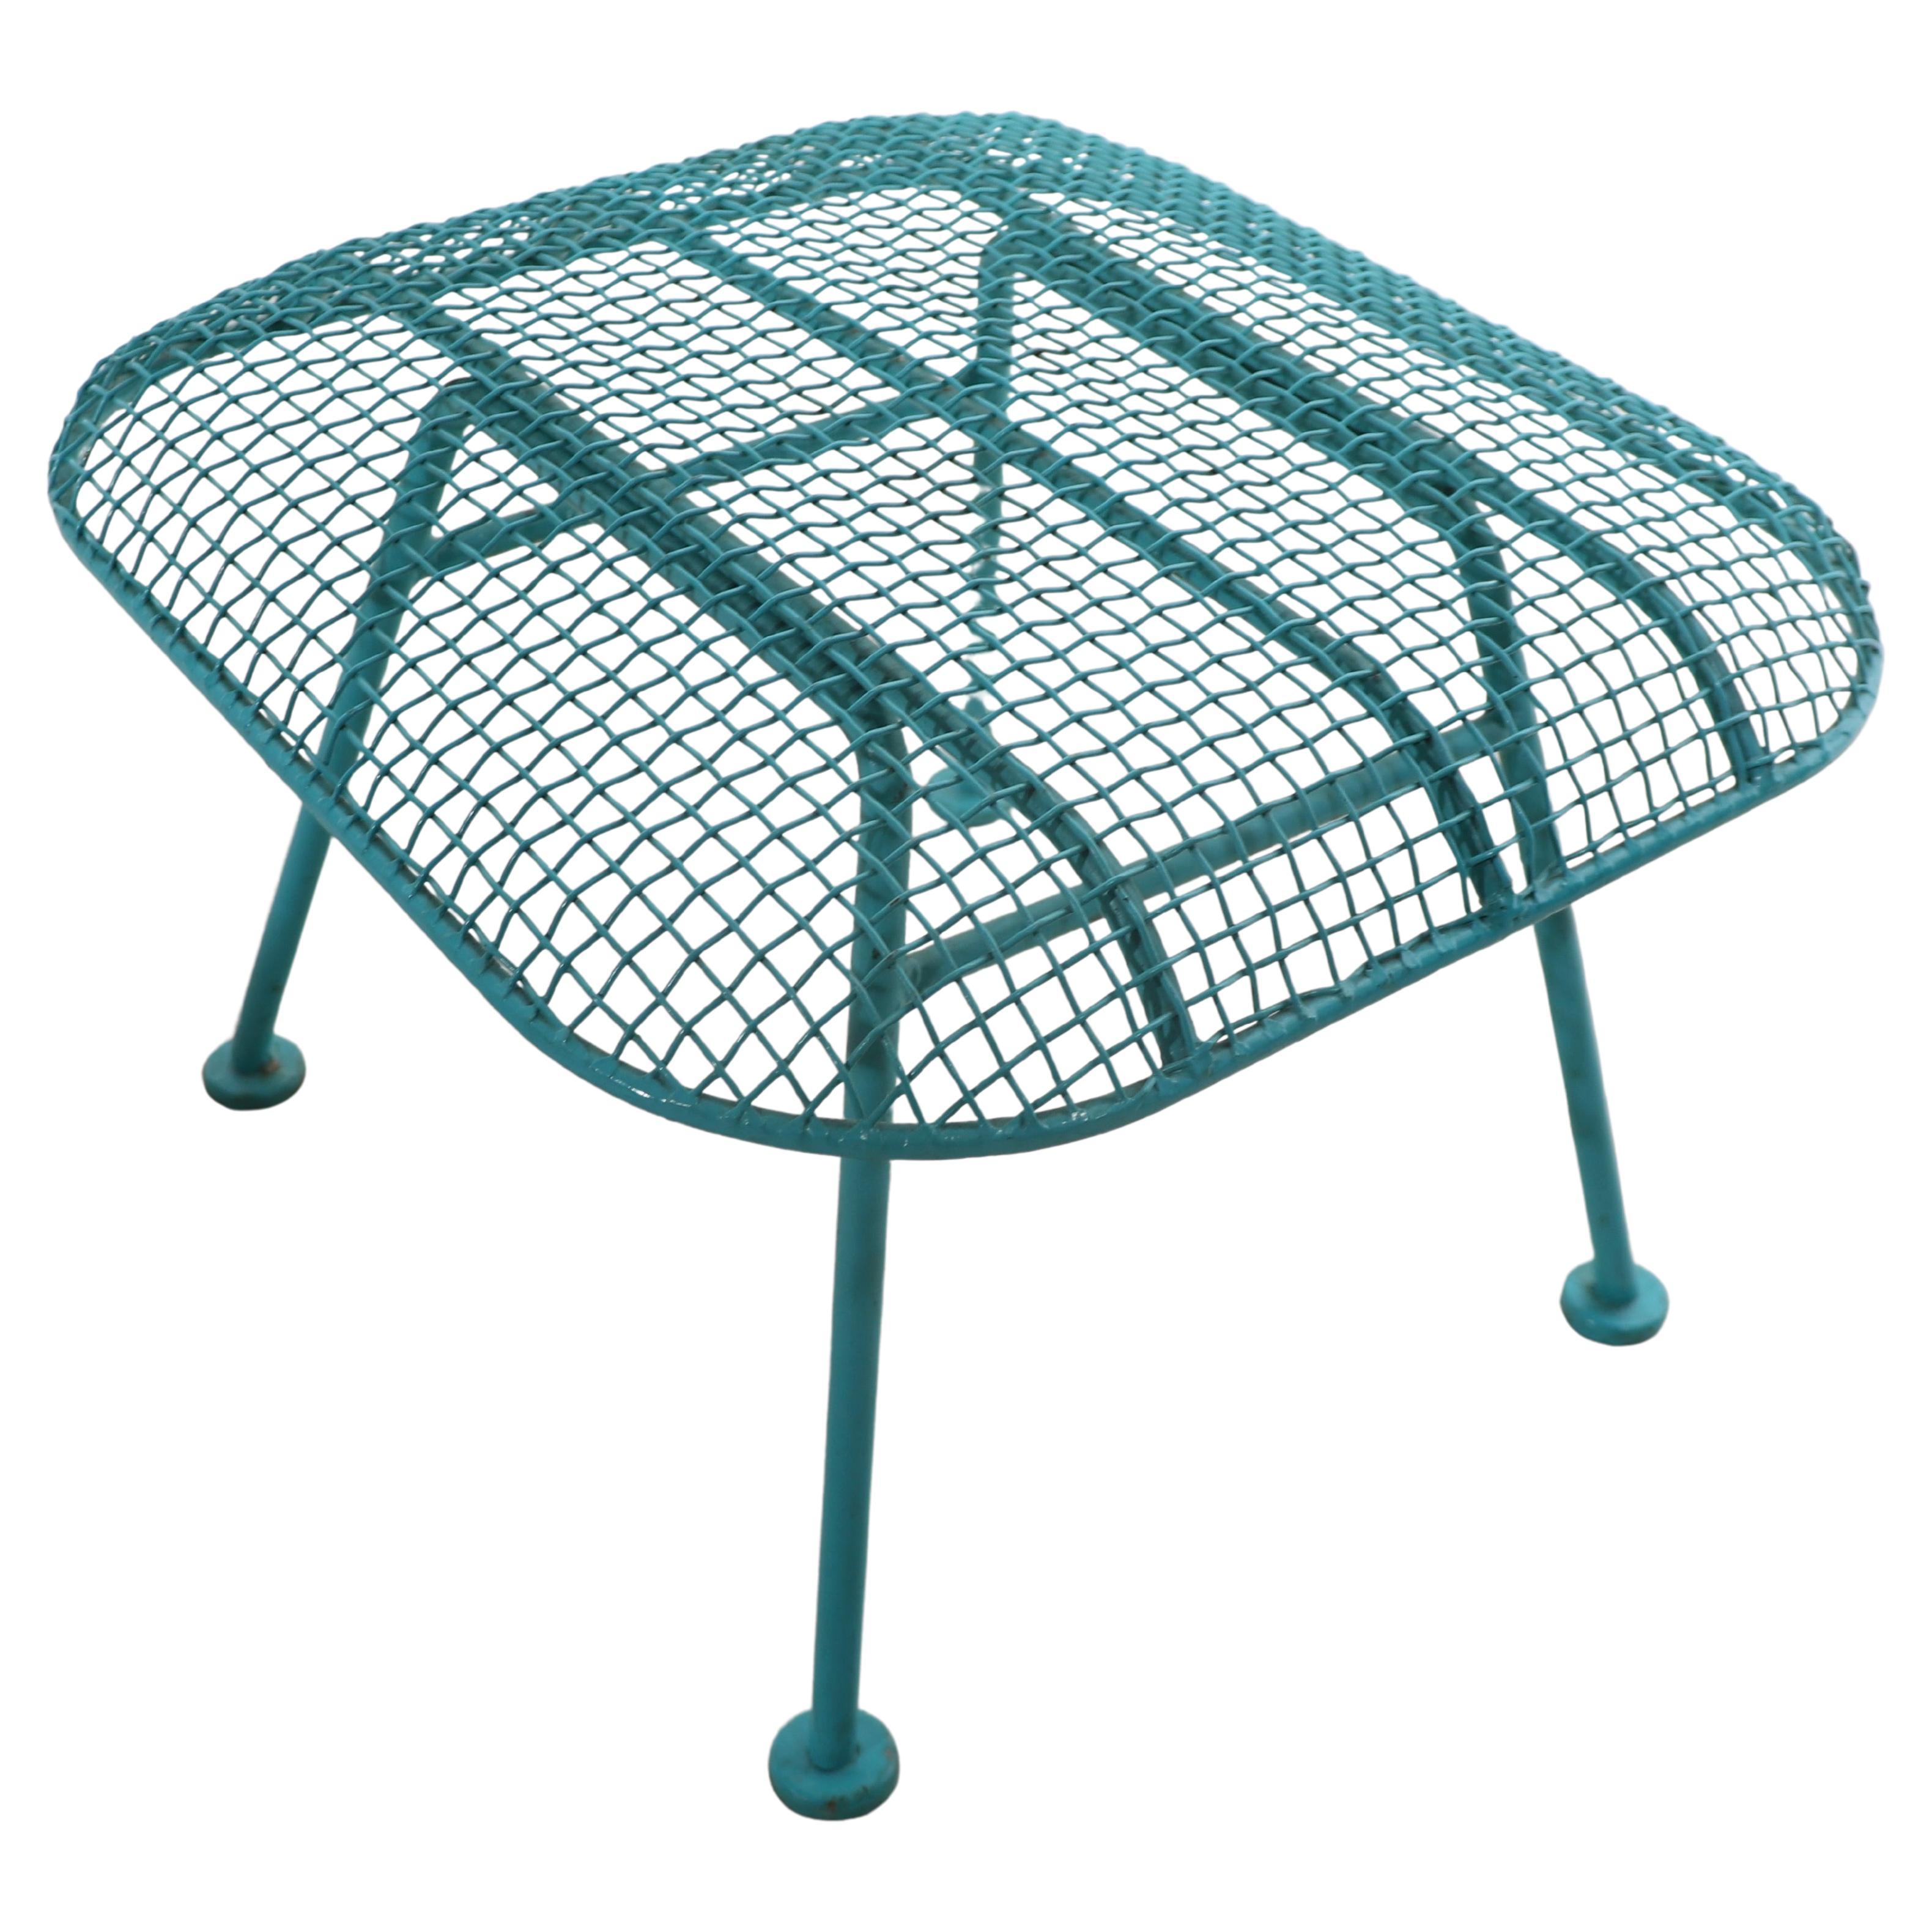 Woodard Sculptura Stool, Ottoman, Footrest in Metal Mesh and Wrought Iron For Sale